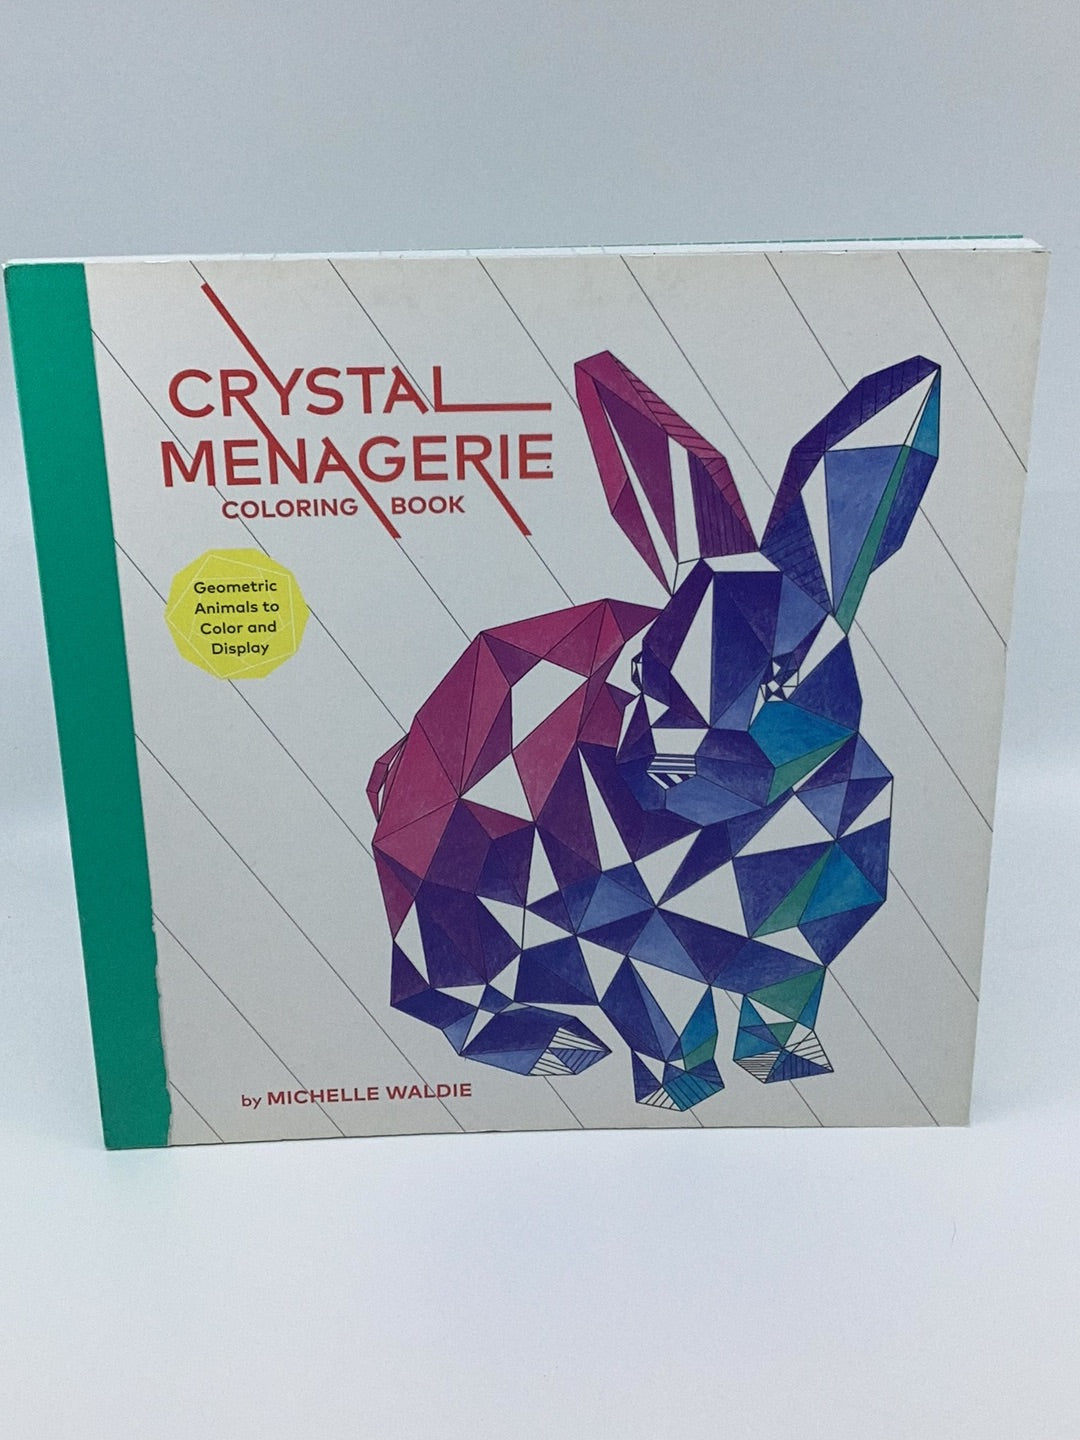 Crystal Menagerie Coloring Book: Geometric Animals to Color and Display (Adult Coloring Book, Spiritual Gifts, Calming Coloring Book)